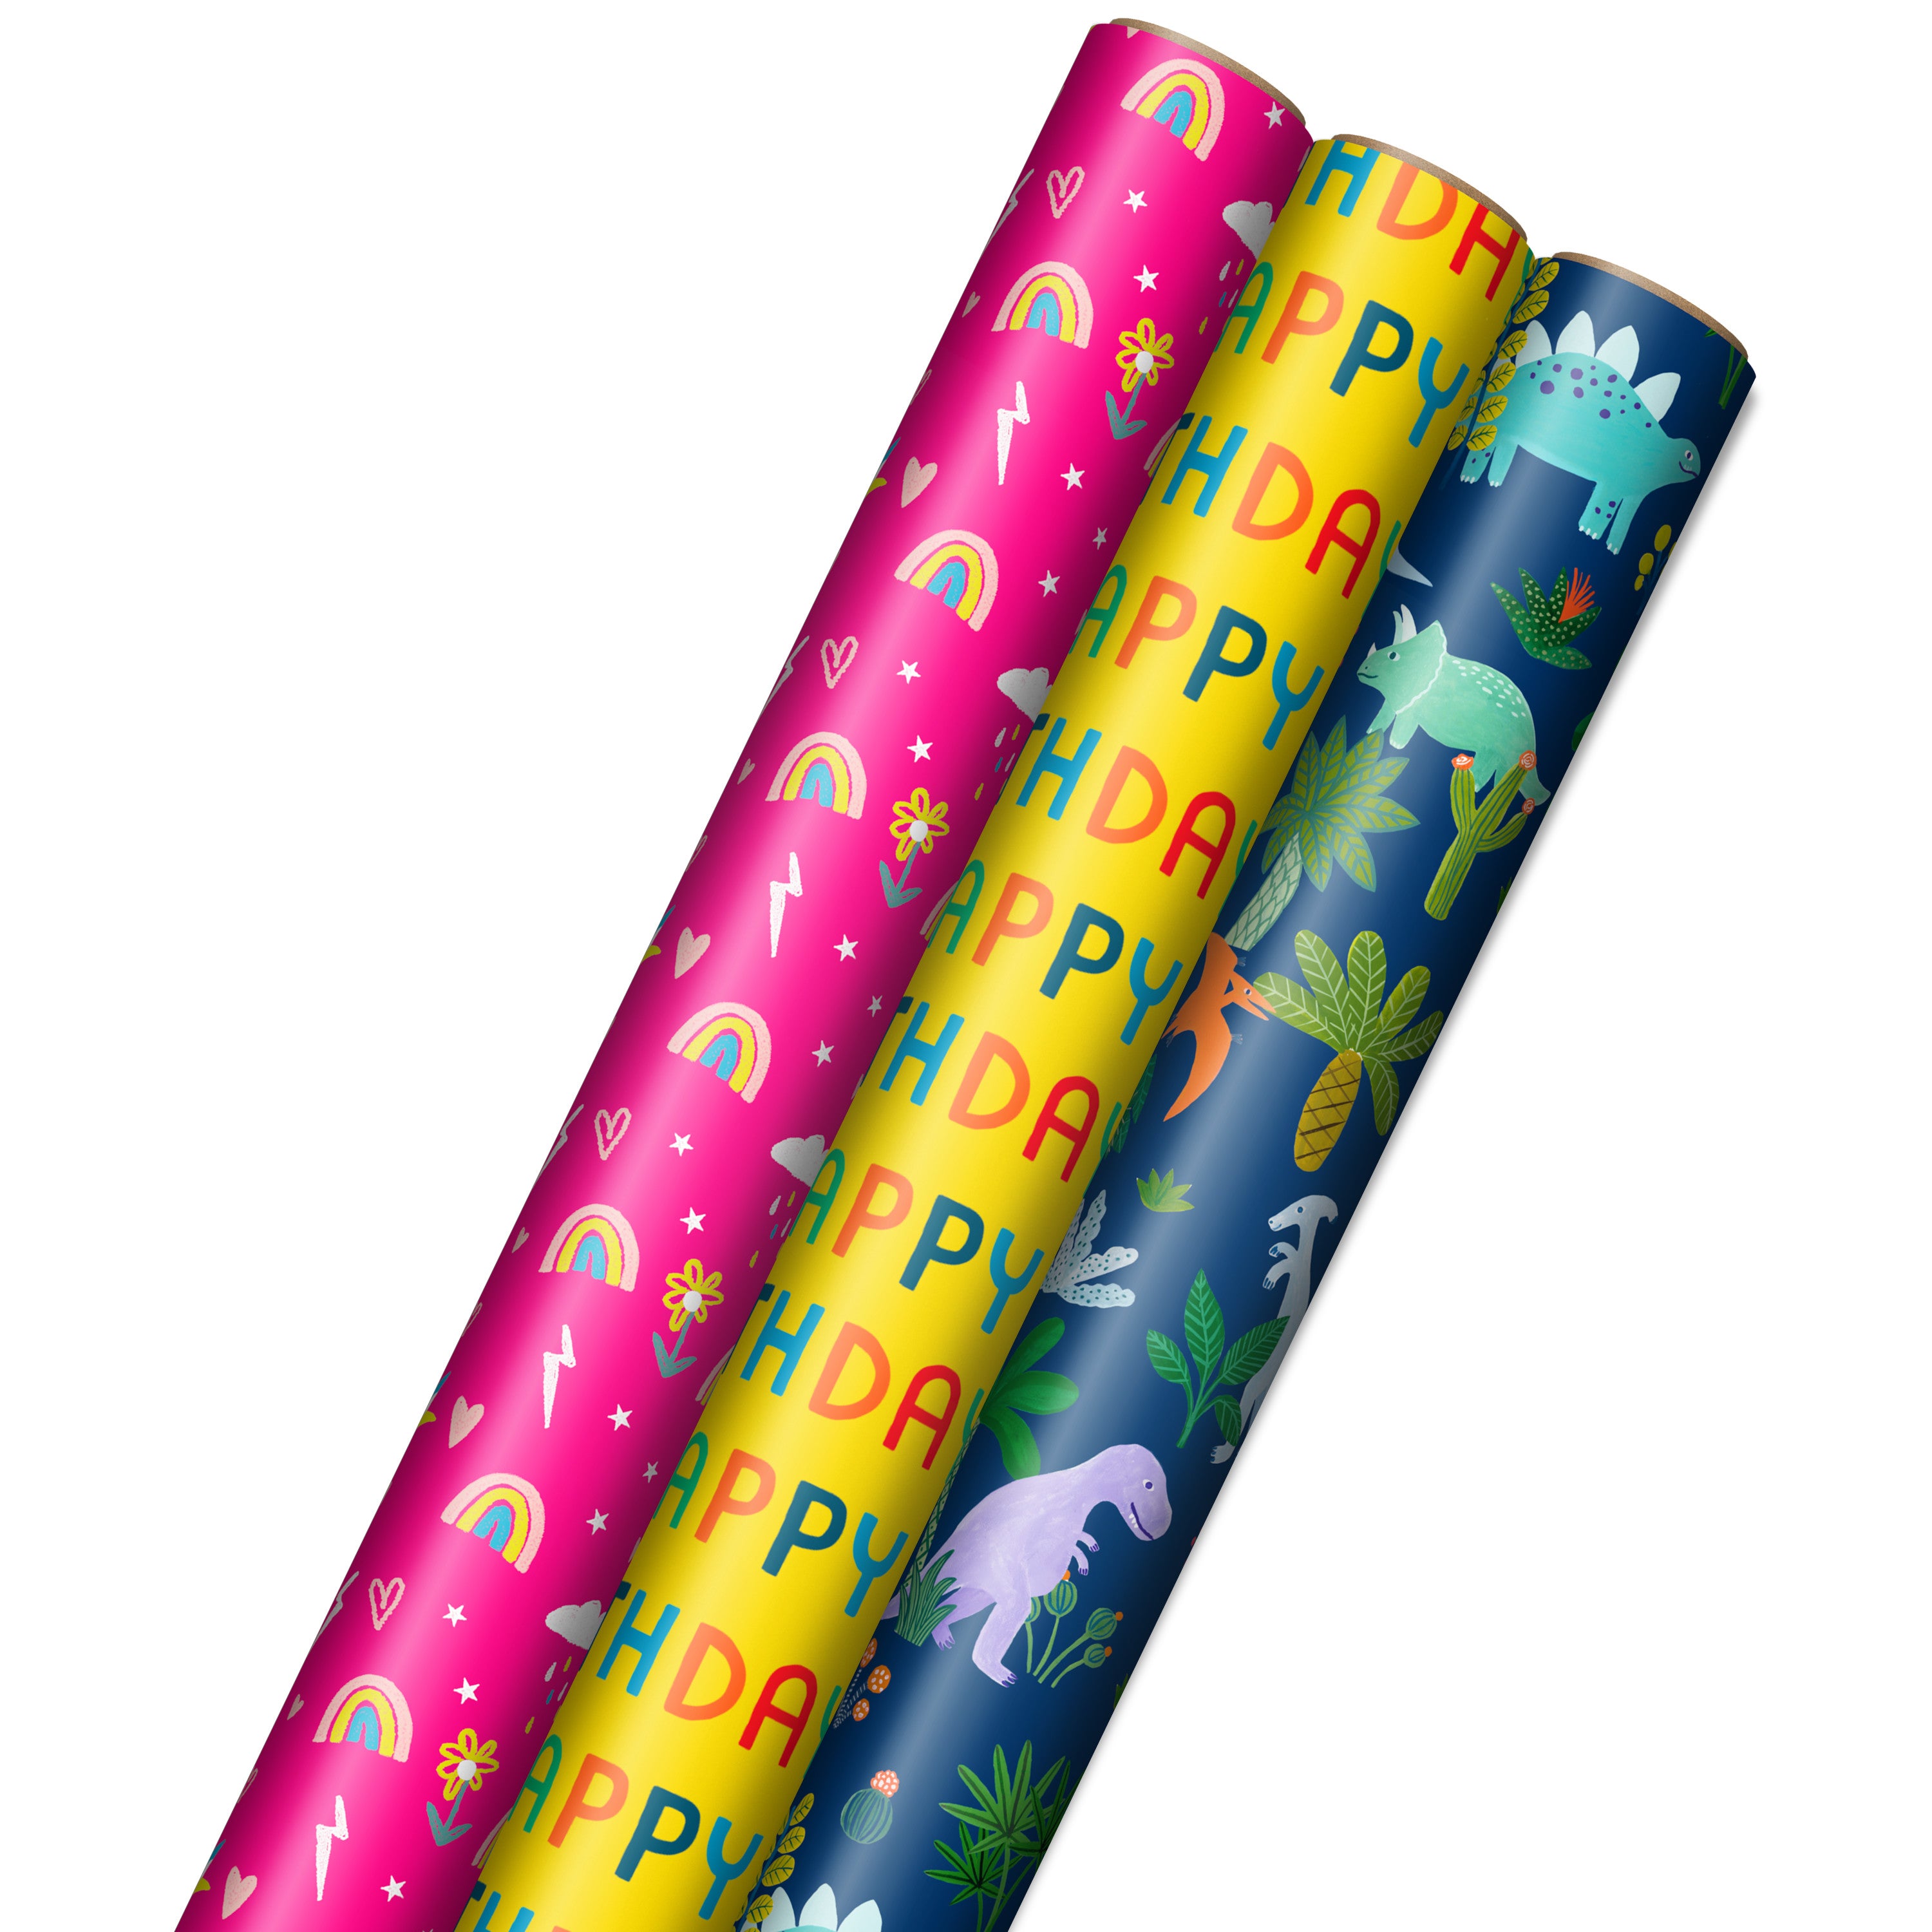 Kids Birthday Wrapping Paper (3 Rolls: 75 sq. ft. total) Pink Rainbows, Blue Dinosaurs, Yellow "Happy Birthday"